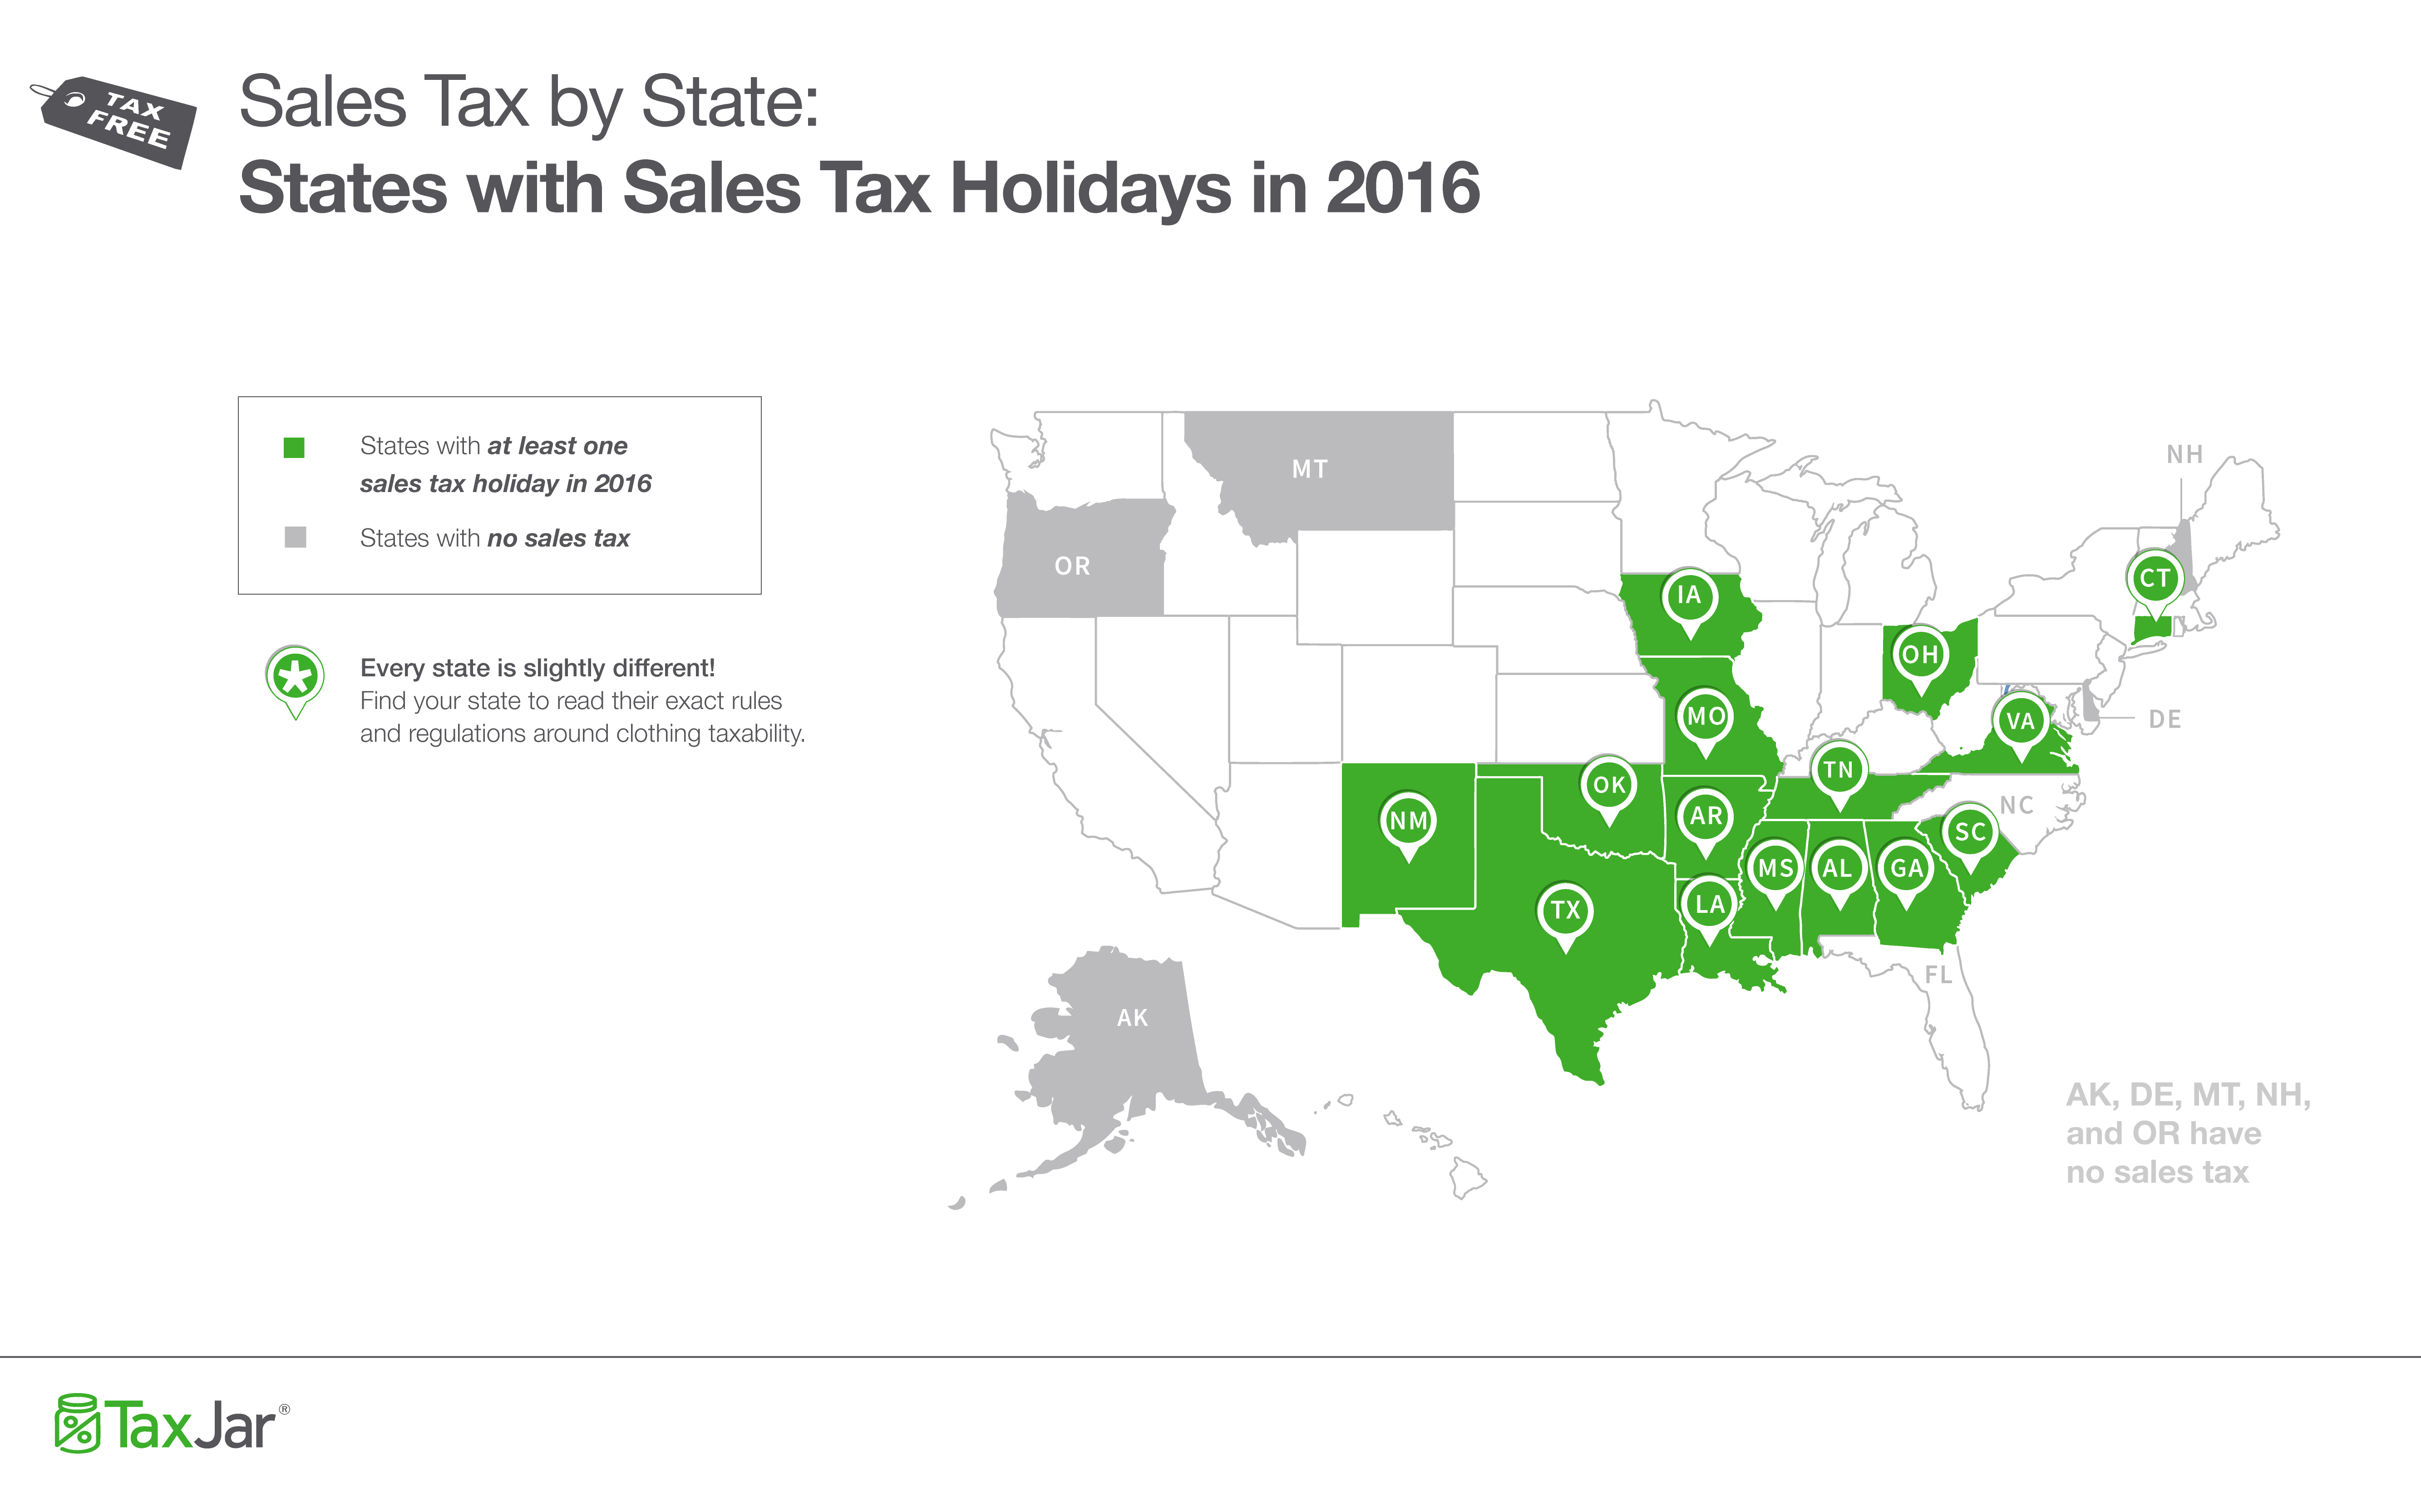 When are the Sales Tax Holidays in 2016?